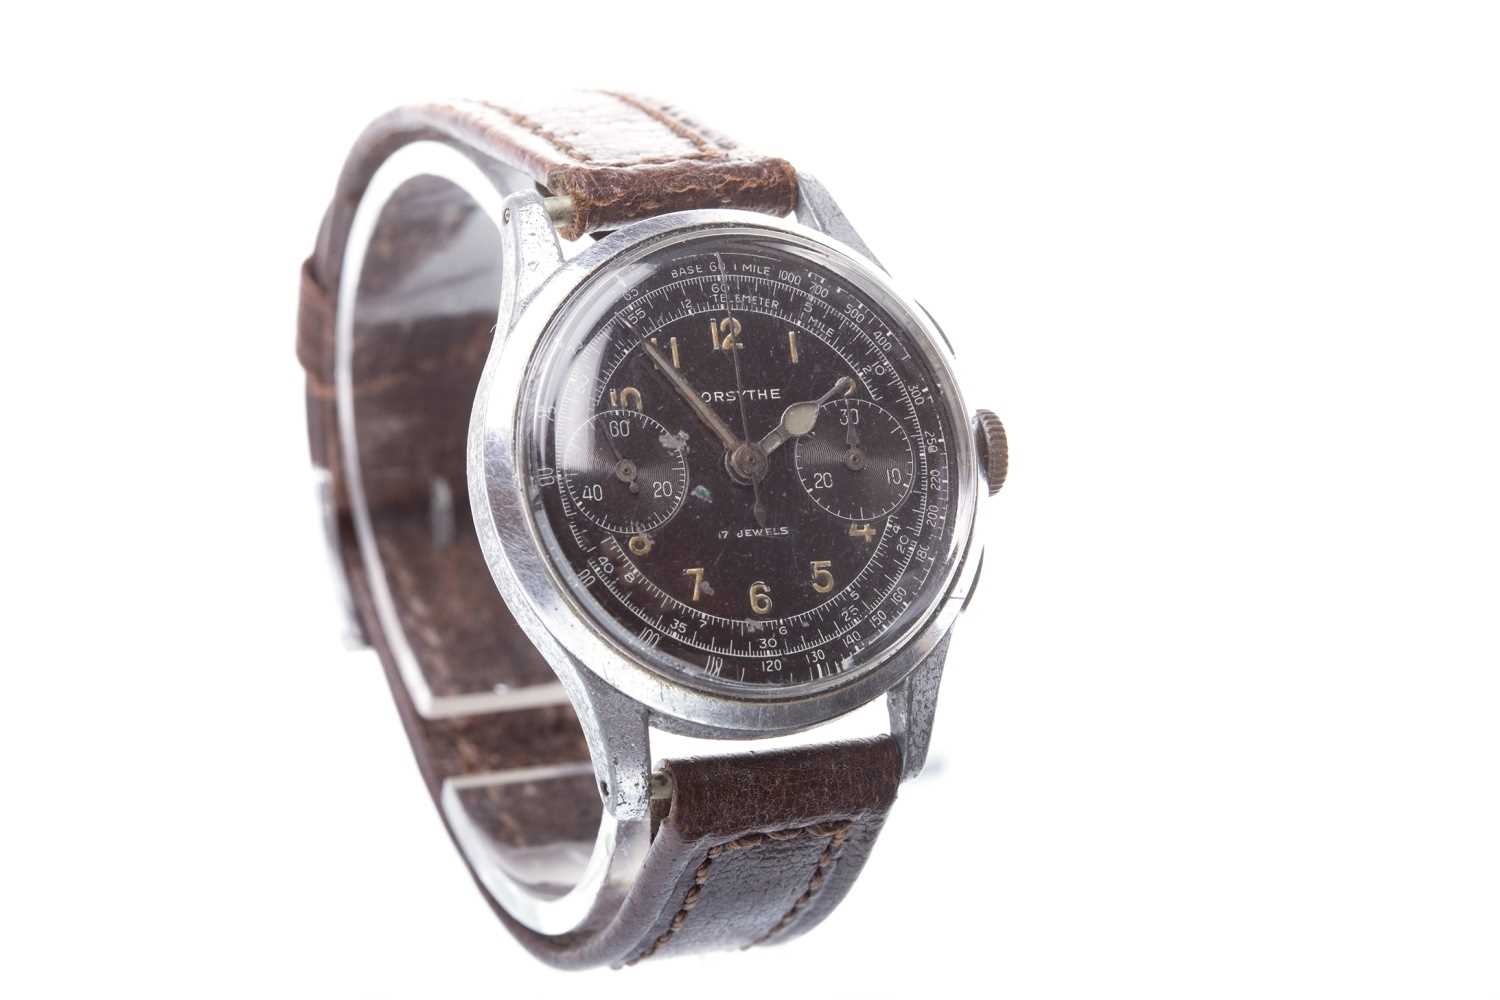 Lot 768 - A GENTLEMAN'S MILITARY STYLE FORSYTHE  WATCH